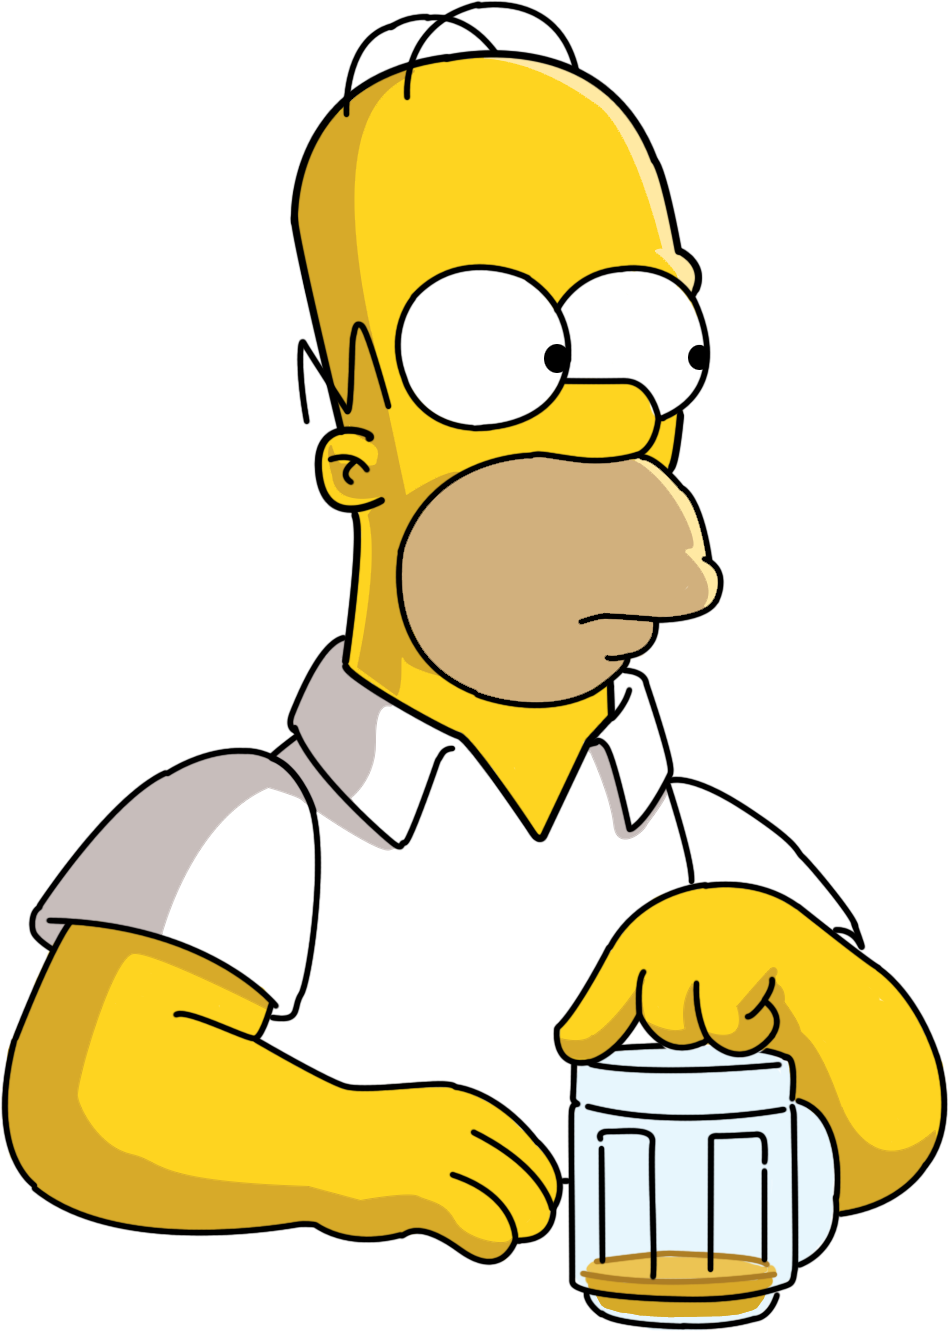 Homer_Simpson_Vector_by_bark2008.png